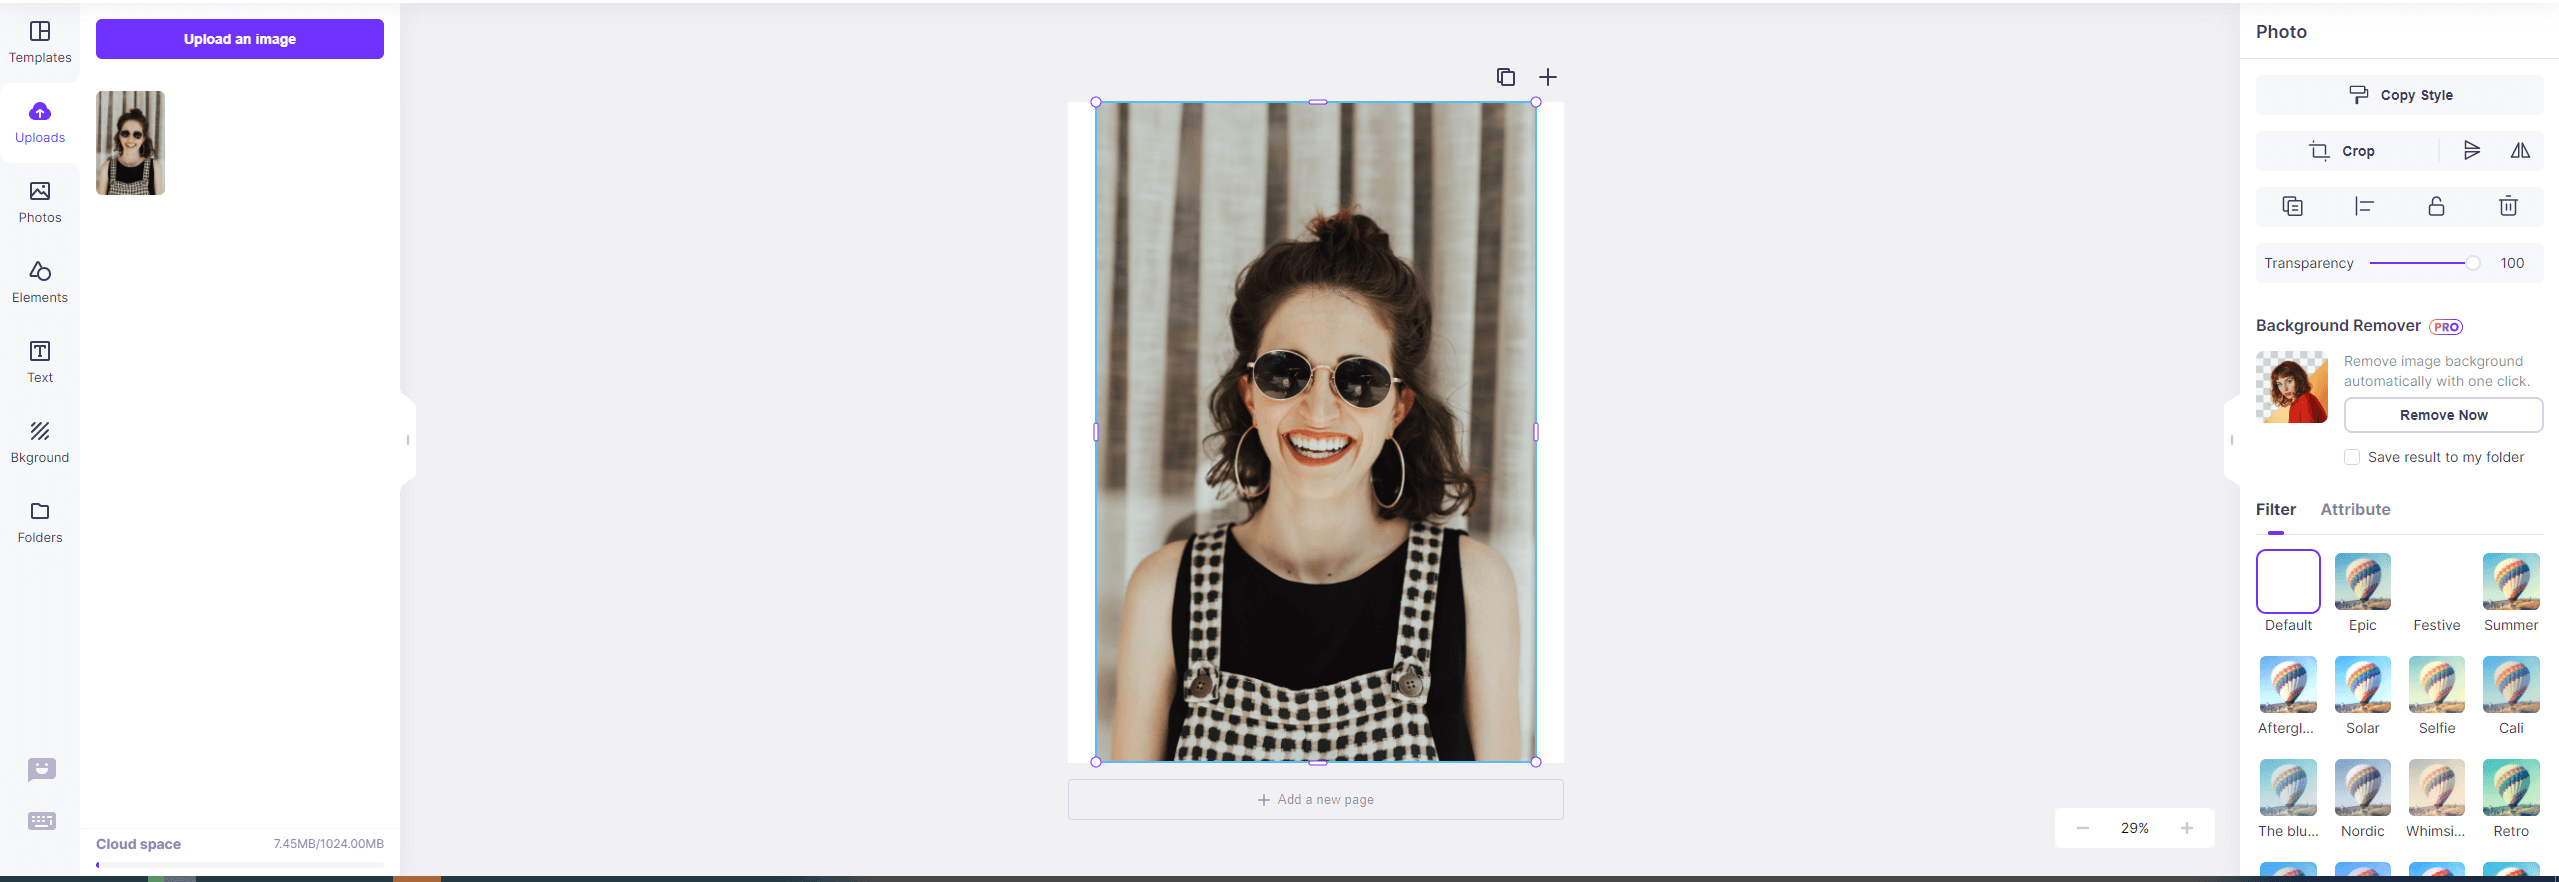 All Methods To Change Photo Background To White